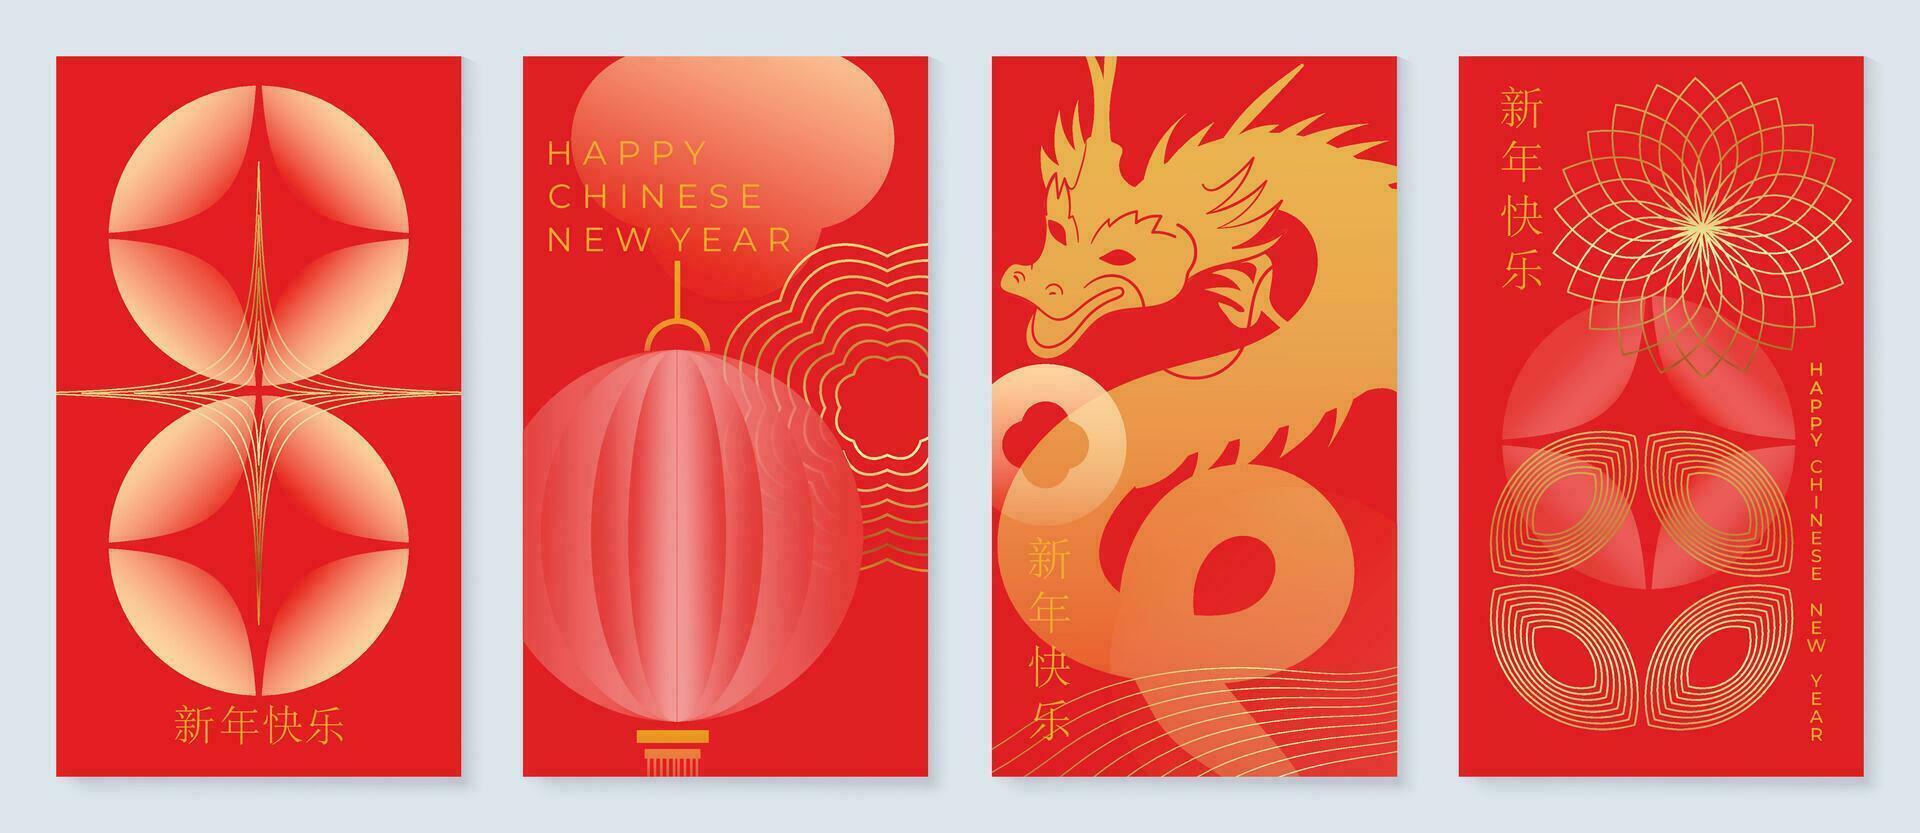 Happy Chinese New Year cover background vector. Year of the dragon design with golden dragon, Chinese lantern, coin, flower. Elegant oriental illustration for cover, banner, website, calendar. vector